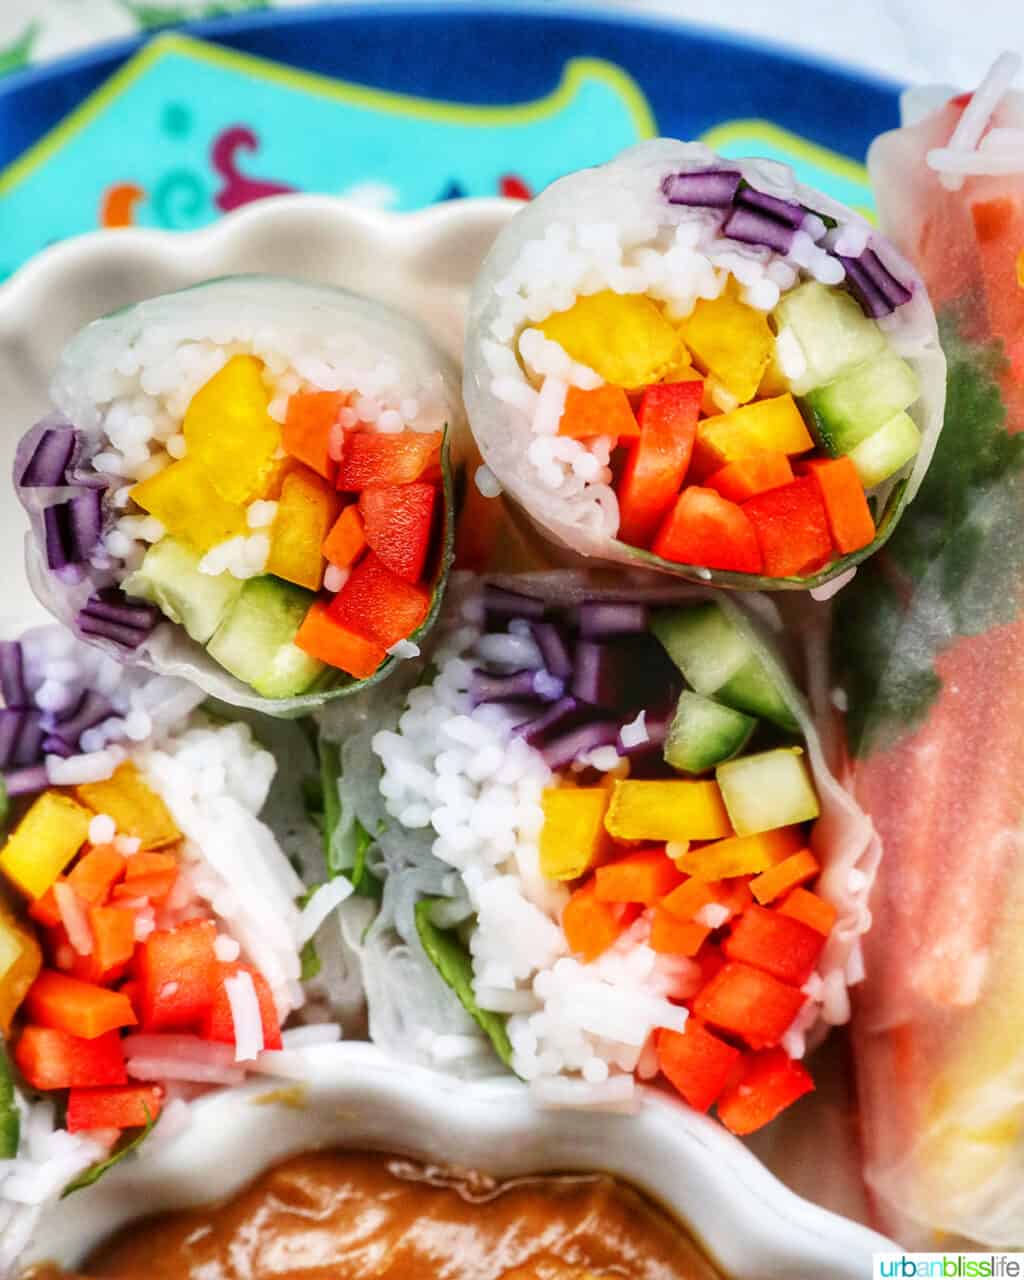 vegan summer rolls cut in half showing the vegetables and vermicelli noodles